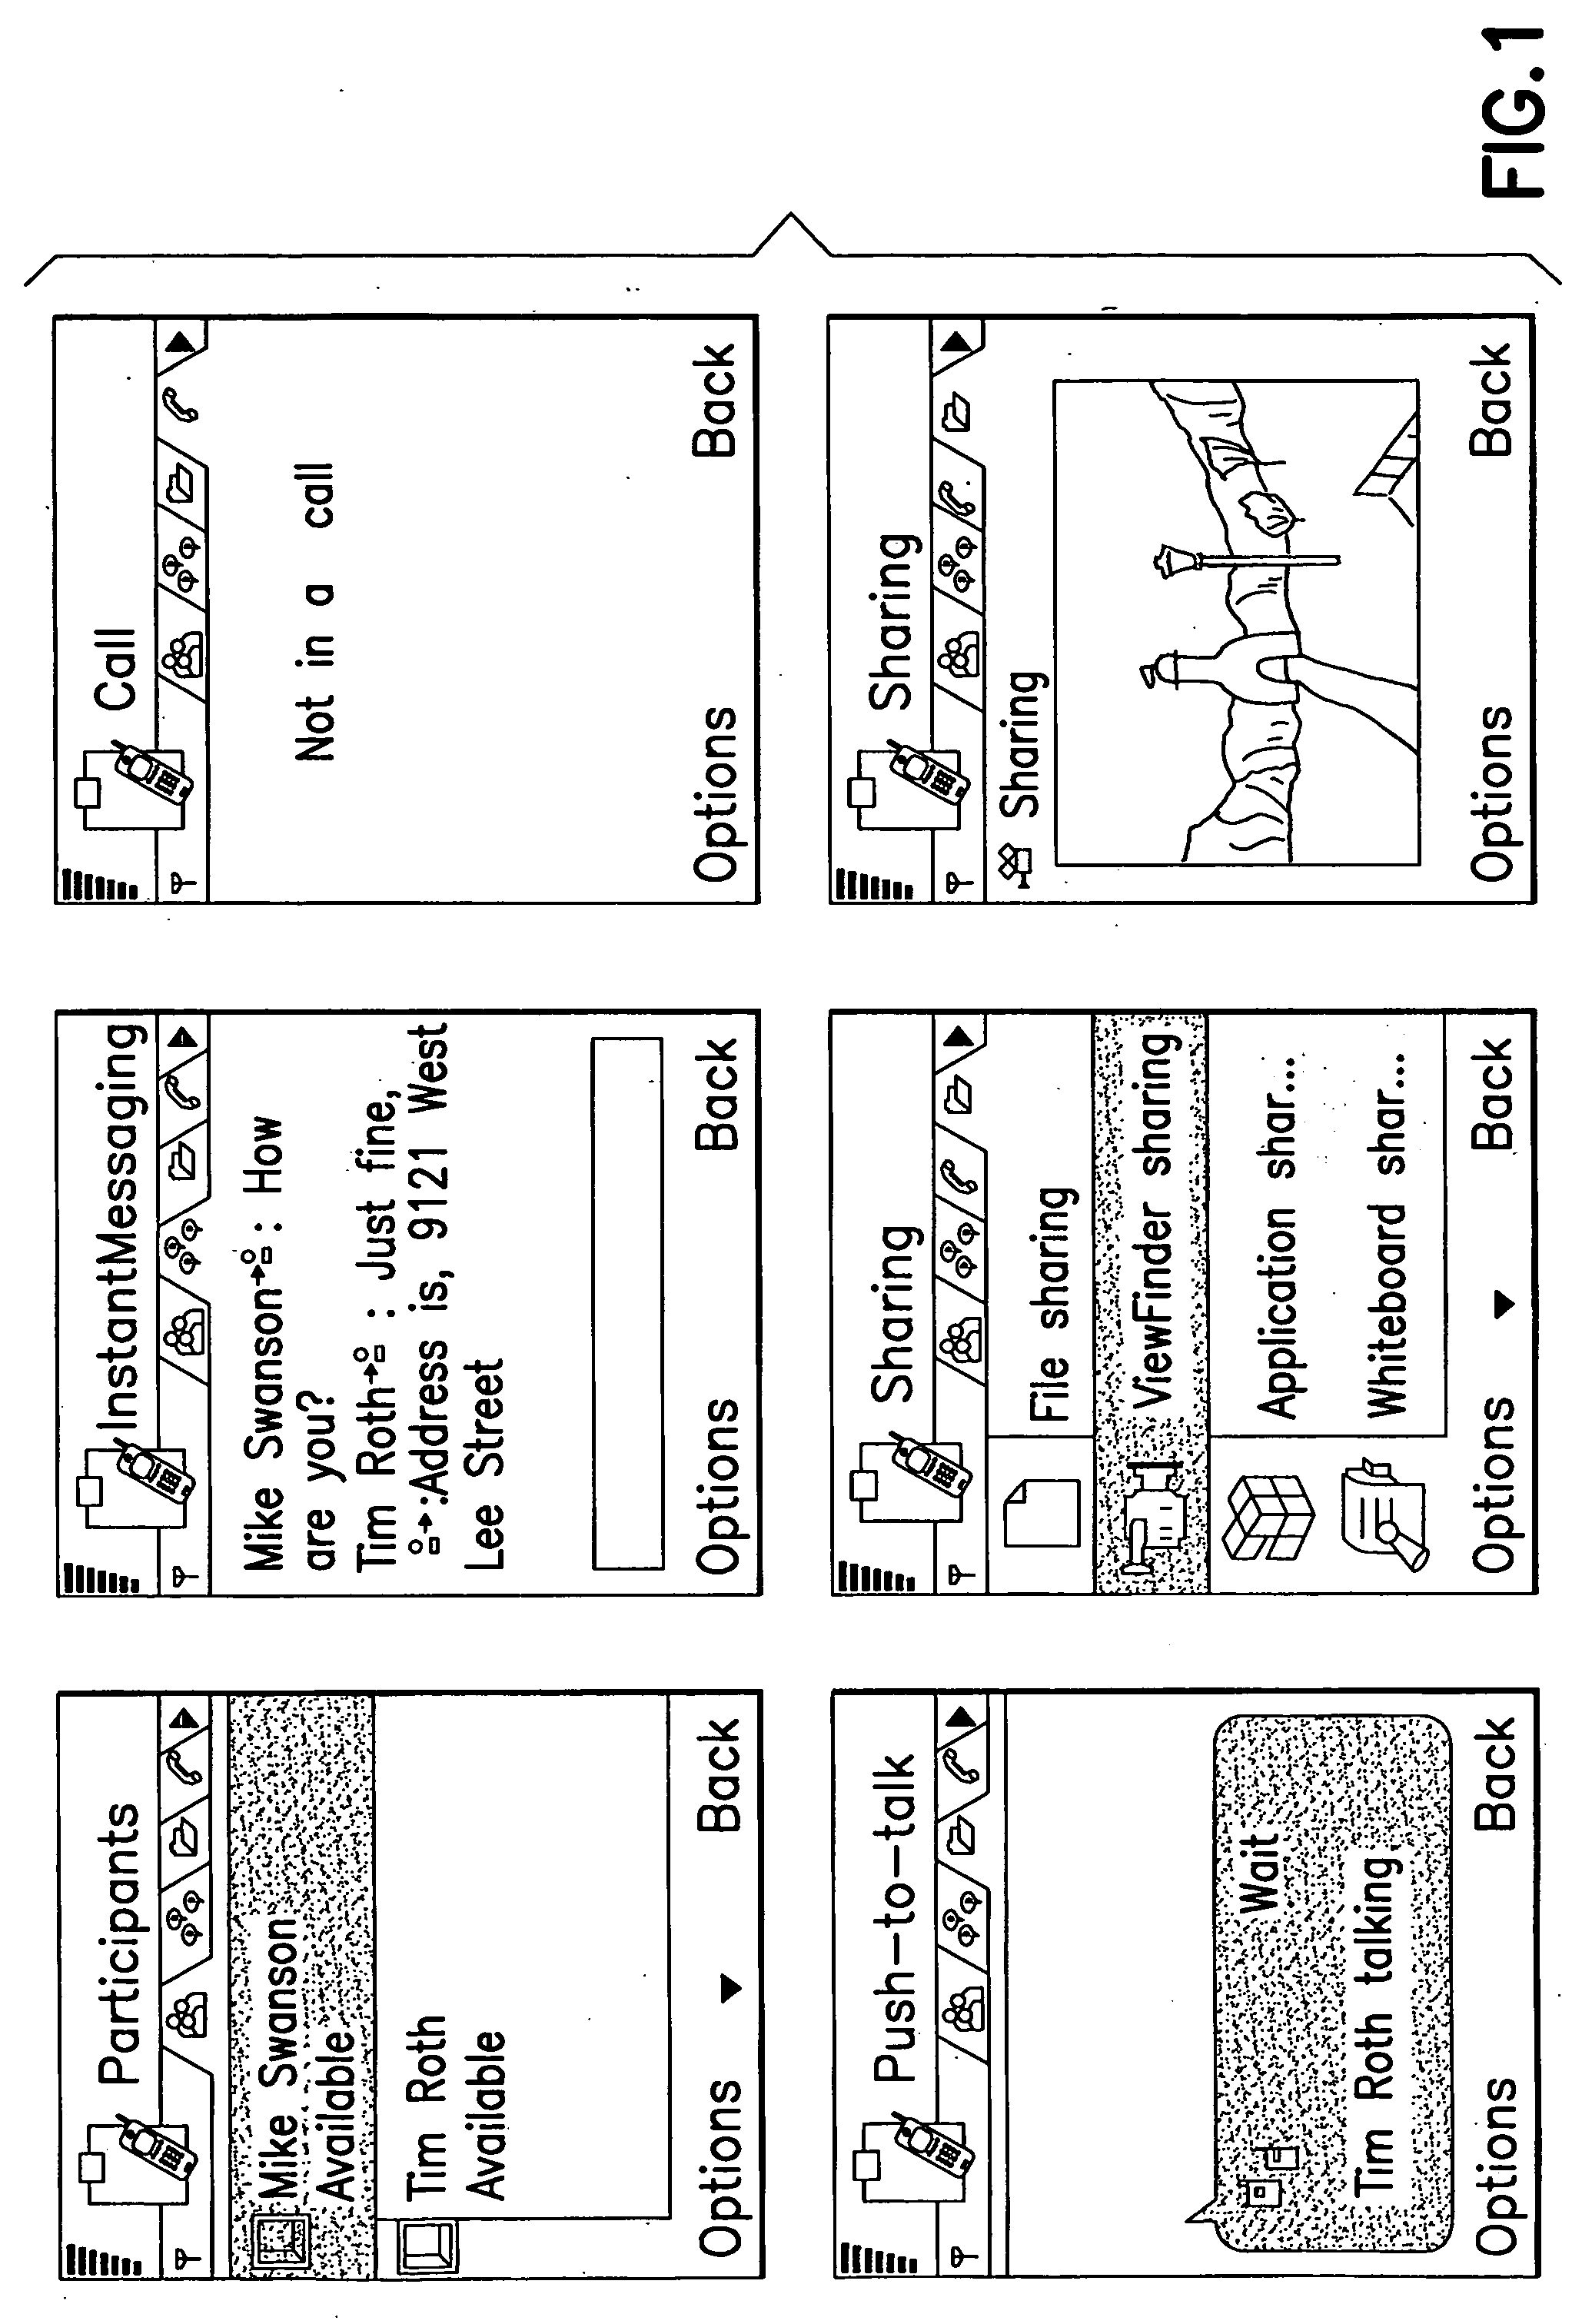 Method, apparatus and computer program product providing graphical user interface that facilitates management of multiple simultaneous communication sessions